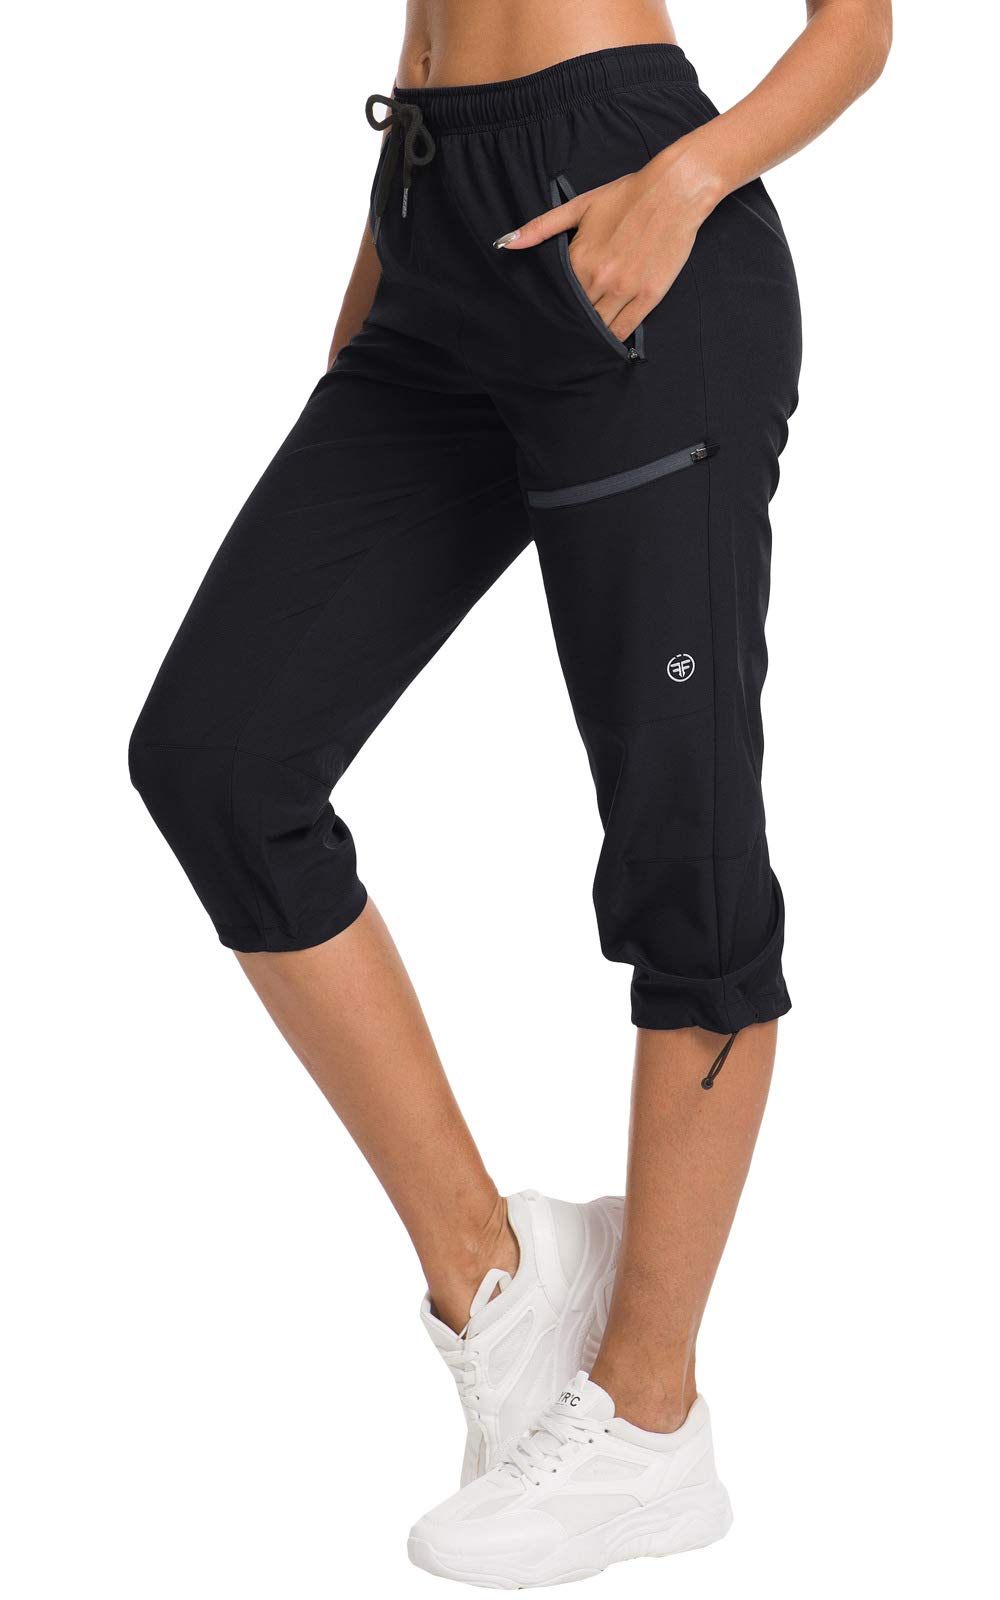 Waterproof Quick Dry Joggers for Women - Size L-XXL UK